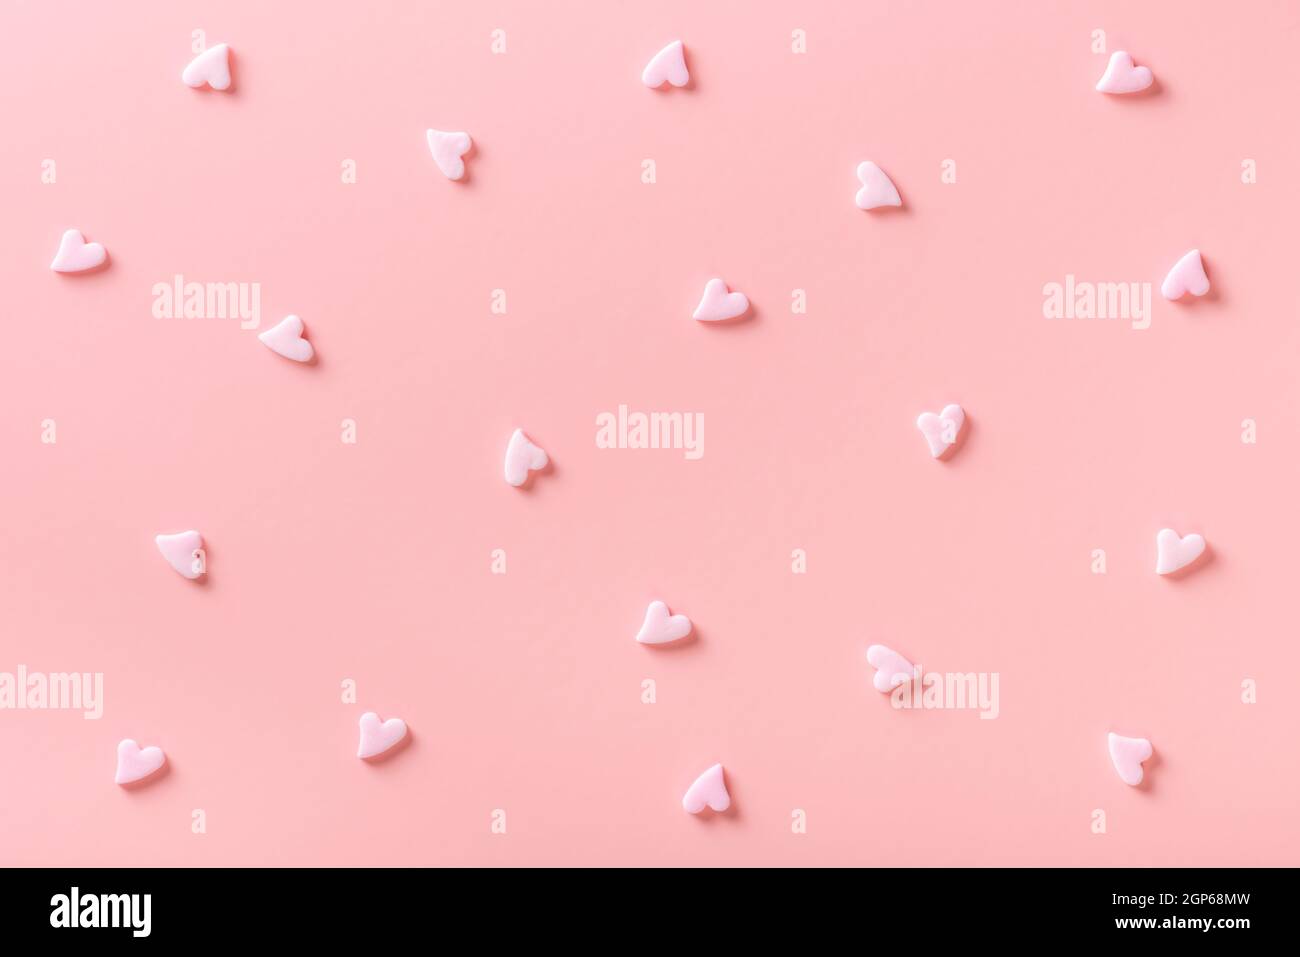 sweet sprinkles of heart shapes over pink background, concept of festive invitation for Valentines day, birthday, holiday and party time Stock Photo